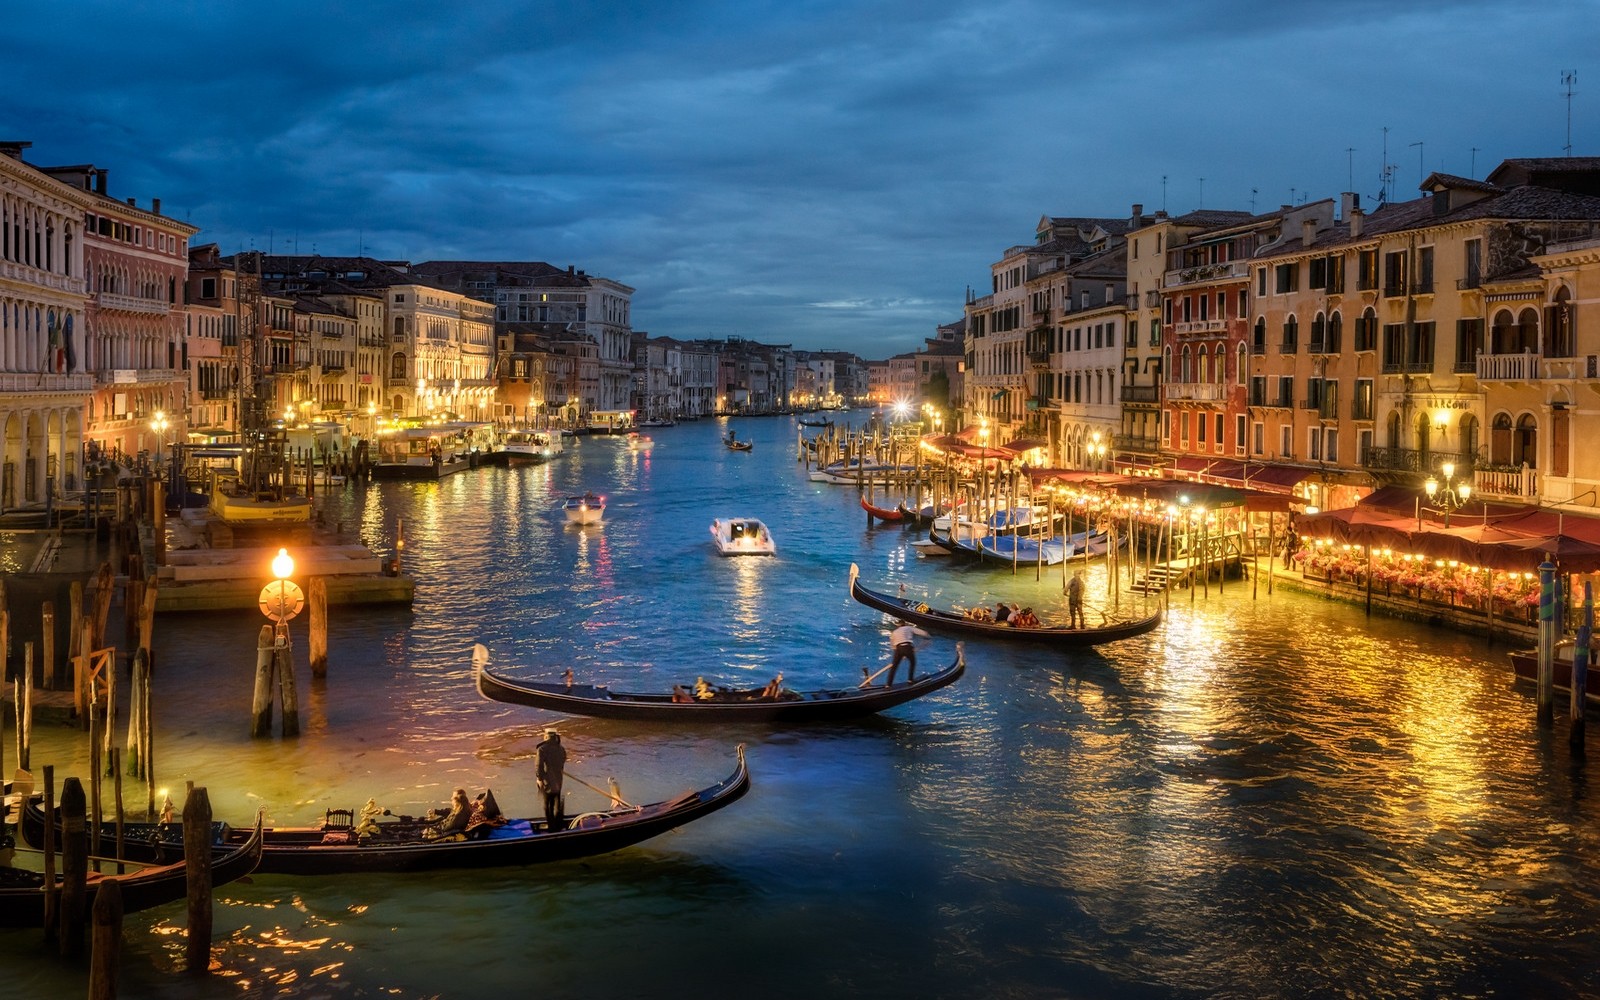 Photography Urban Landscape Architecture Canal Sea Gondolas Lights Old Building Evening Venice Italy 1600x1000